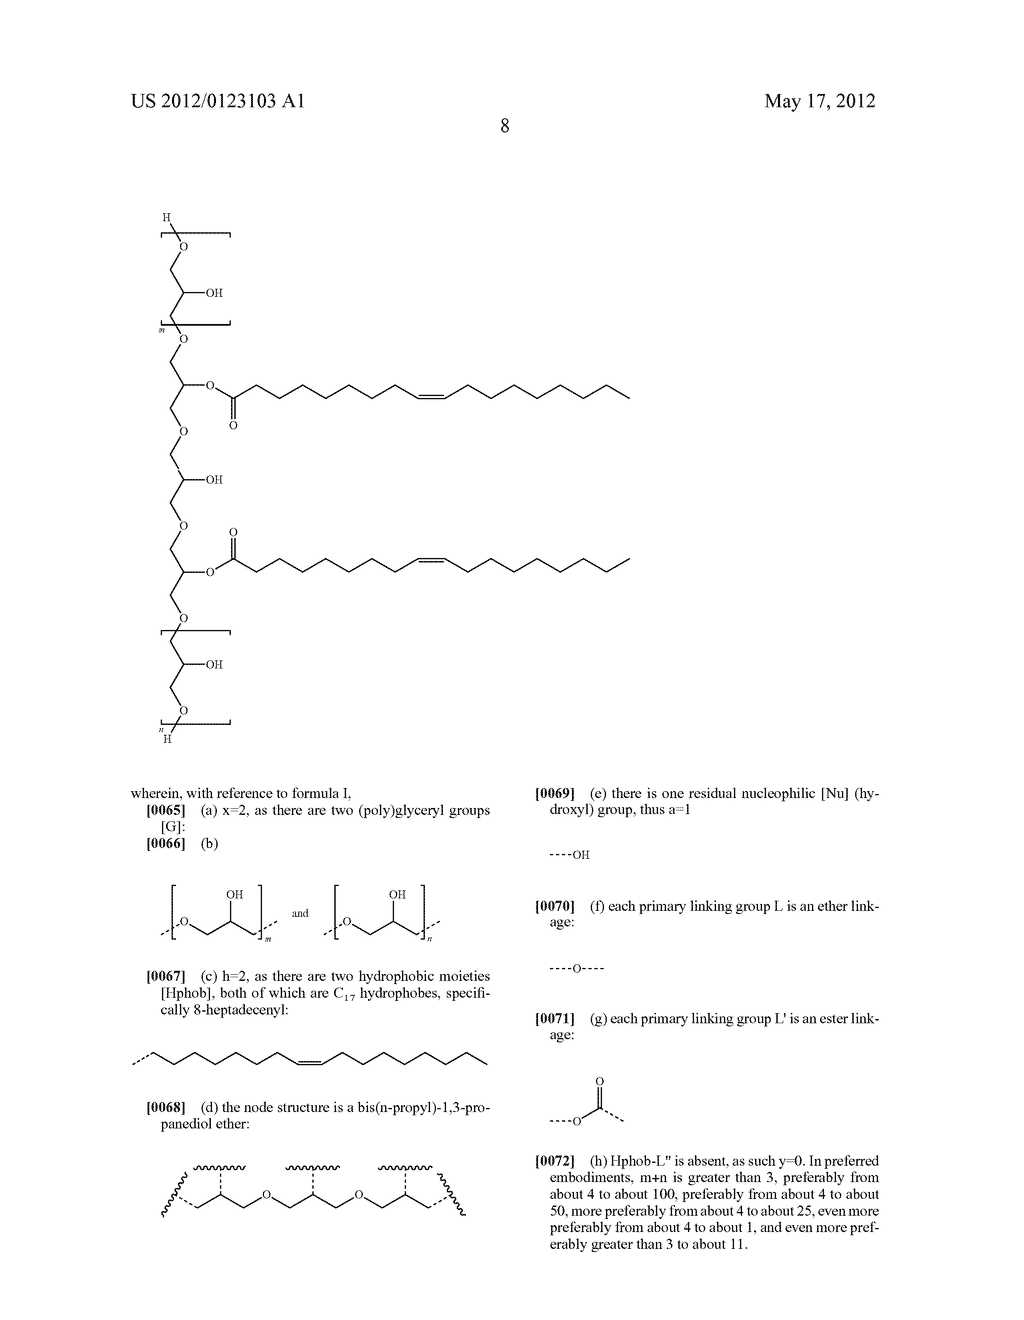 POLYGLYCERYL COMPOUNDS AND COMPOSITIONS - diagram, schematic, and image 13